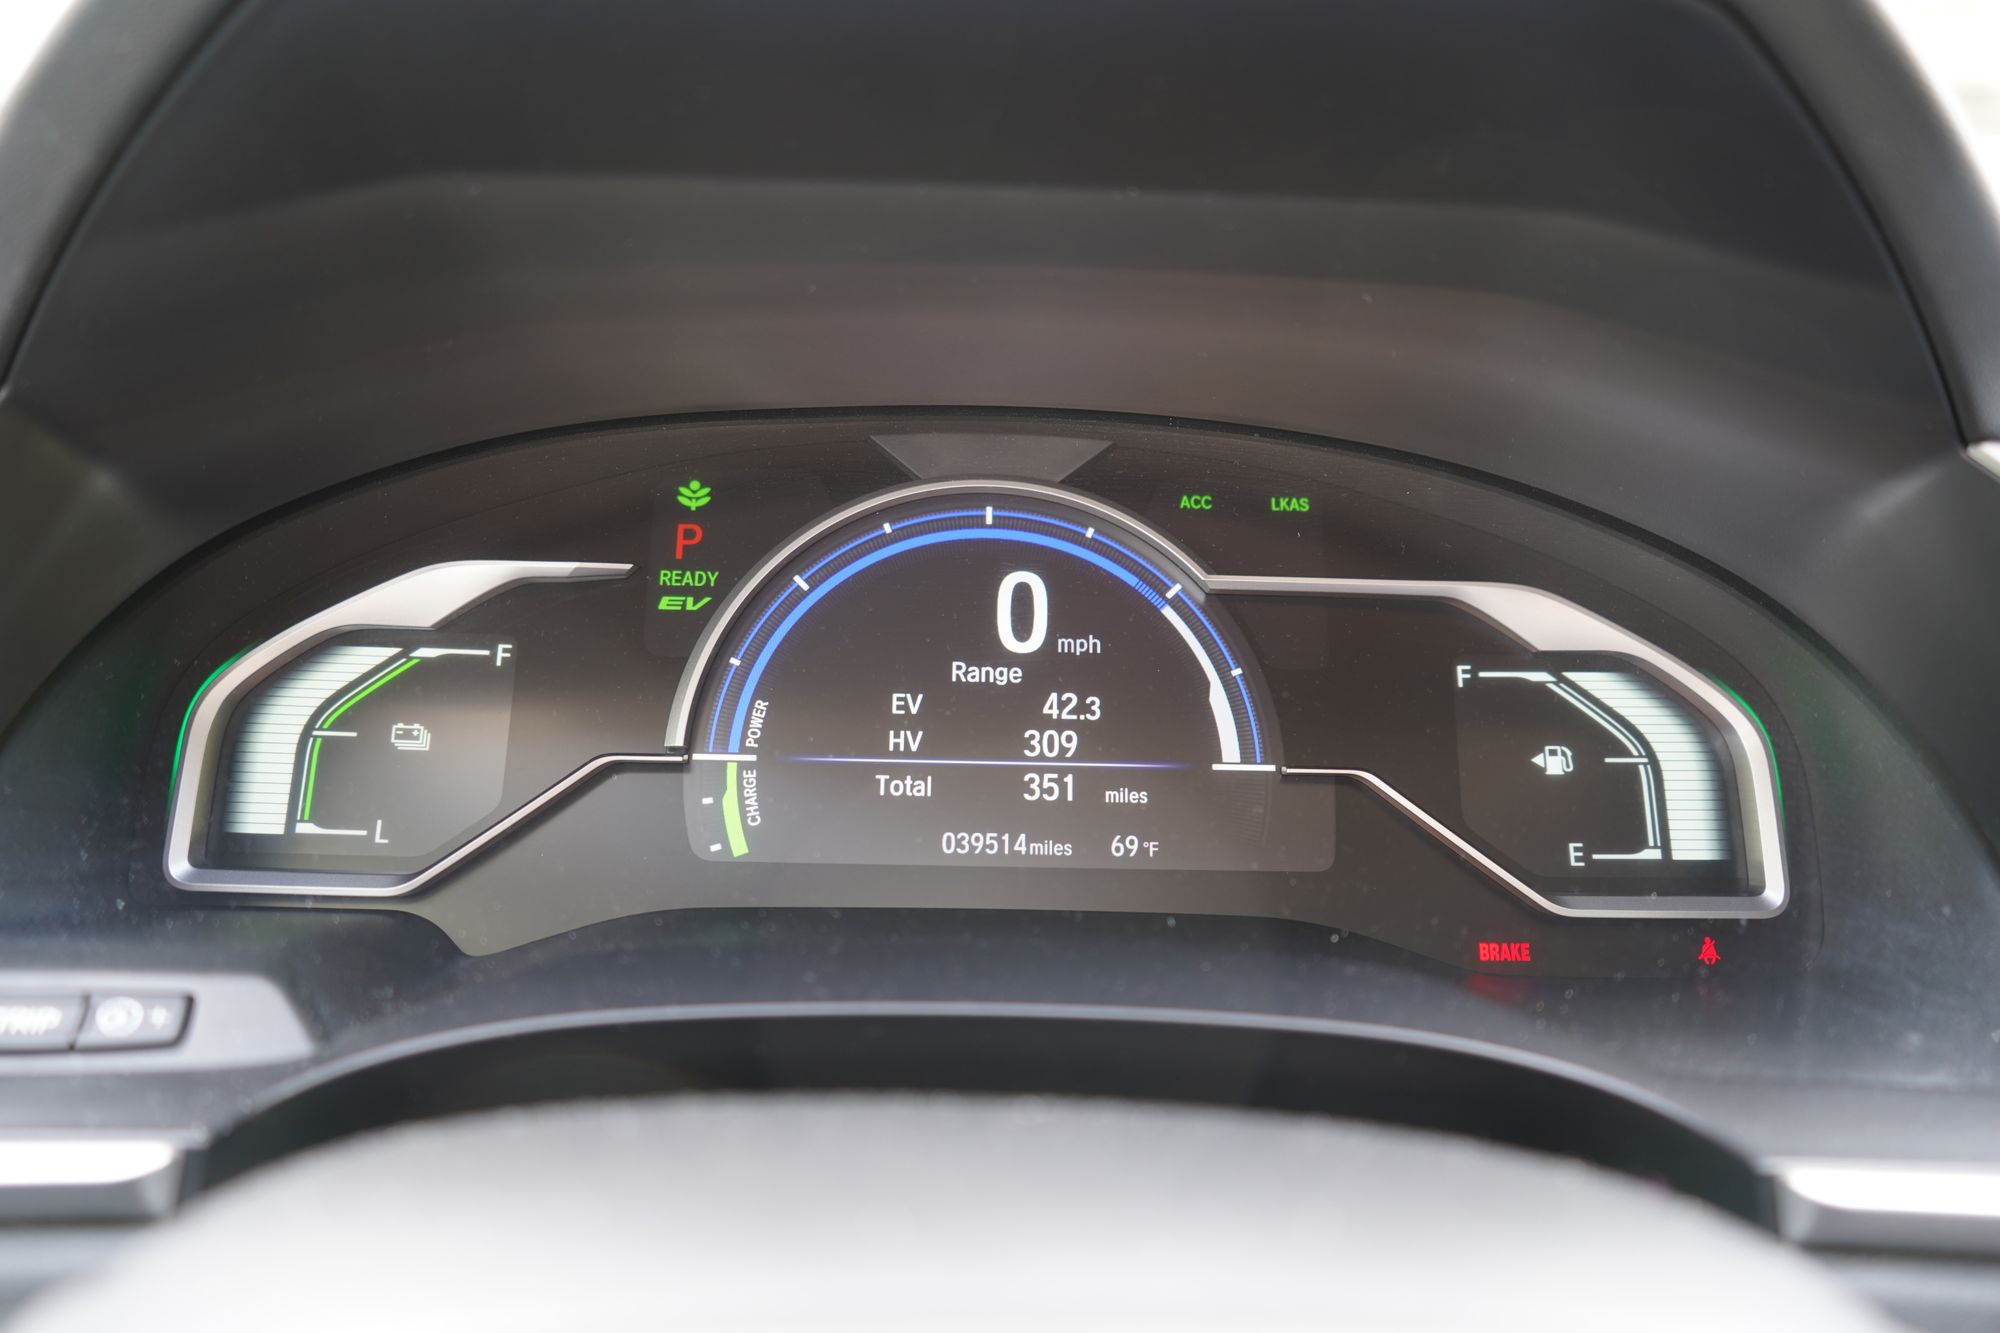 Picture of gauge cluster